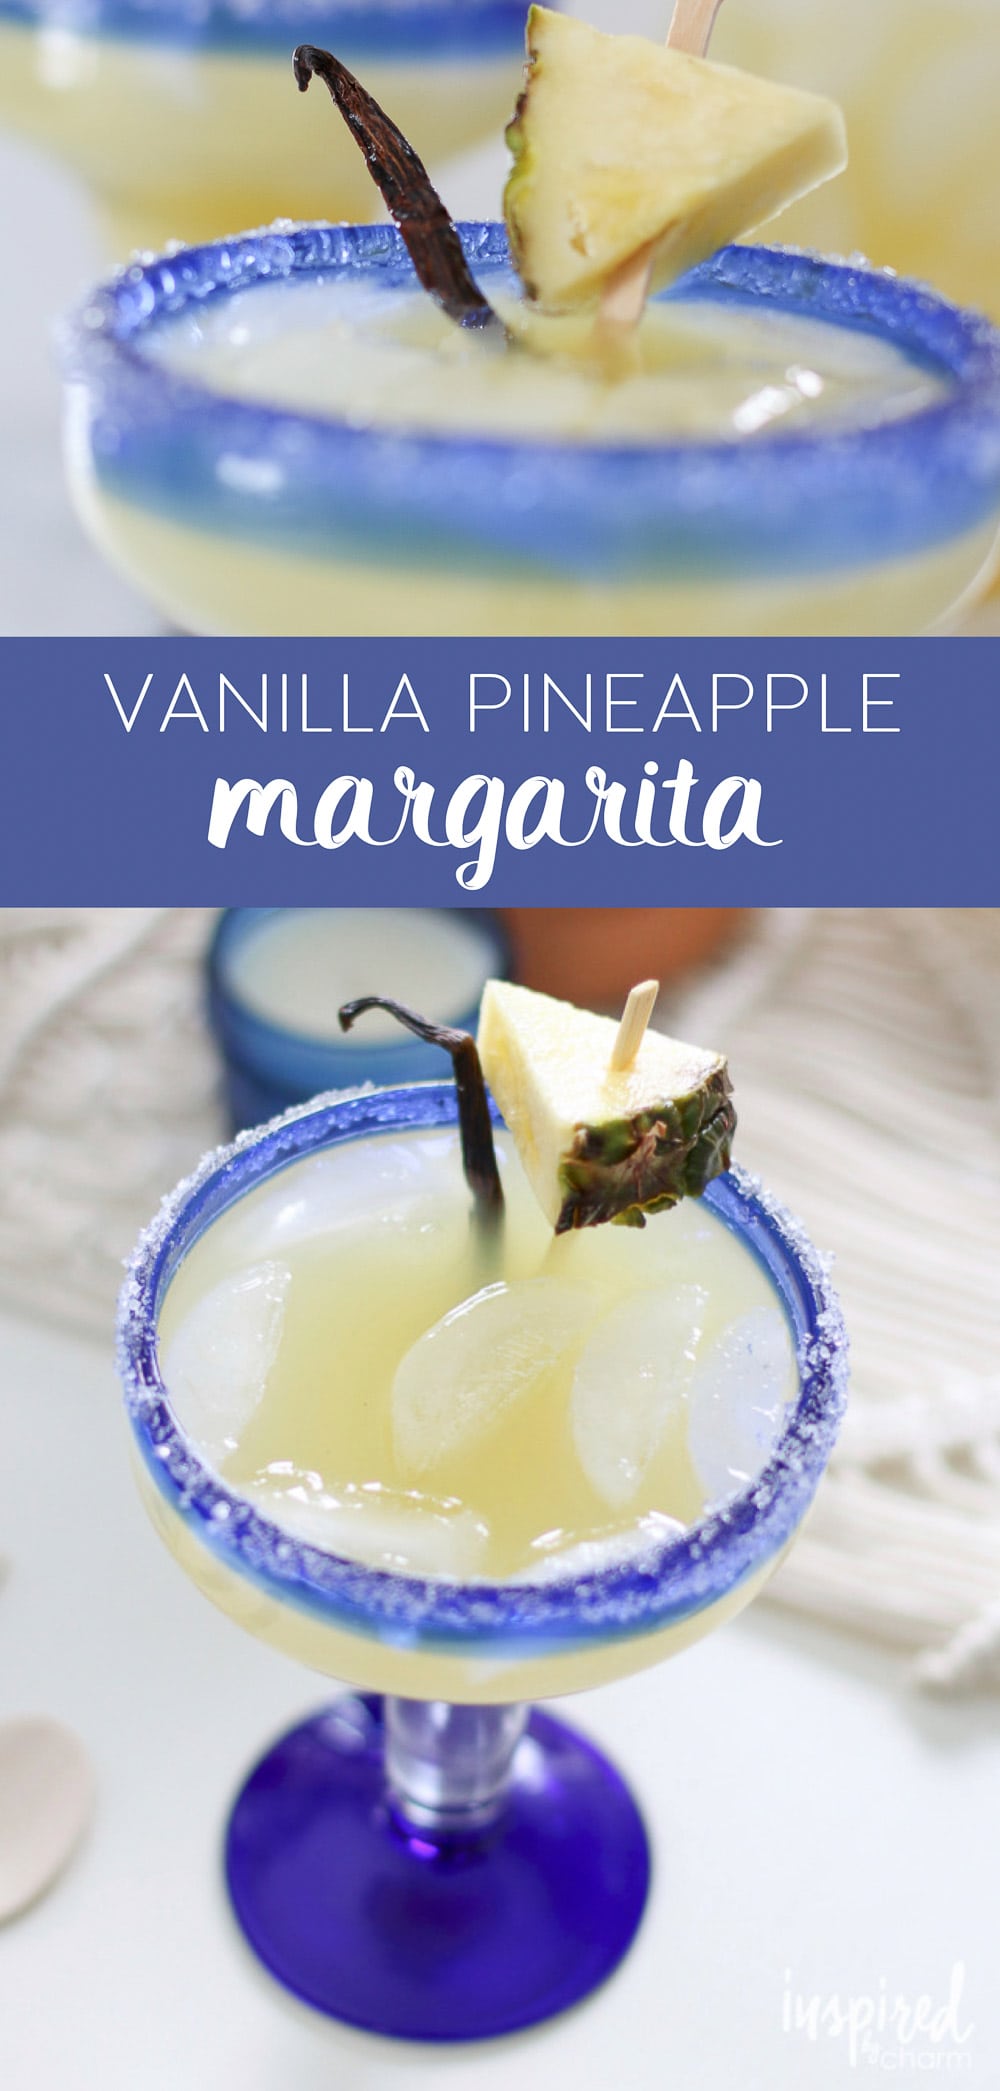 This Vanilla Pineapple Margarita is a sweet and tropical take on the classic. The flavors blend perfectly to create a really unique and delicious cocktail recipe. #vanilla #pineapple #margarita #recipe #cocktail #pineapplemargaritas